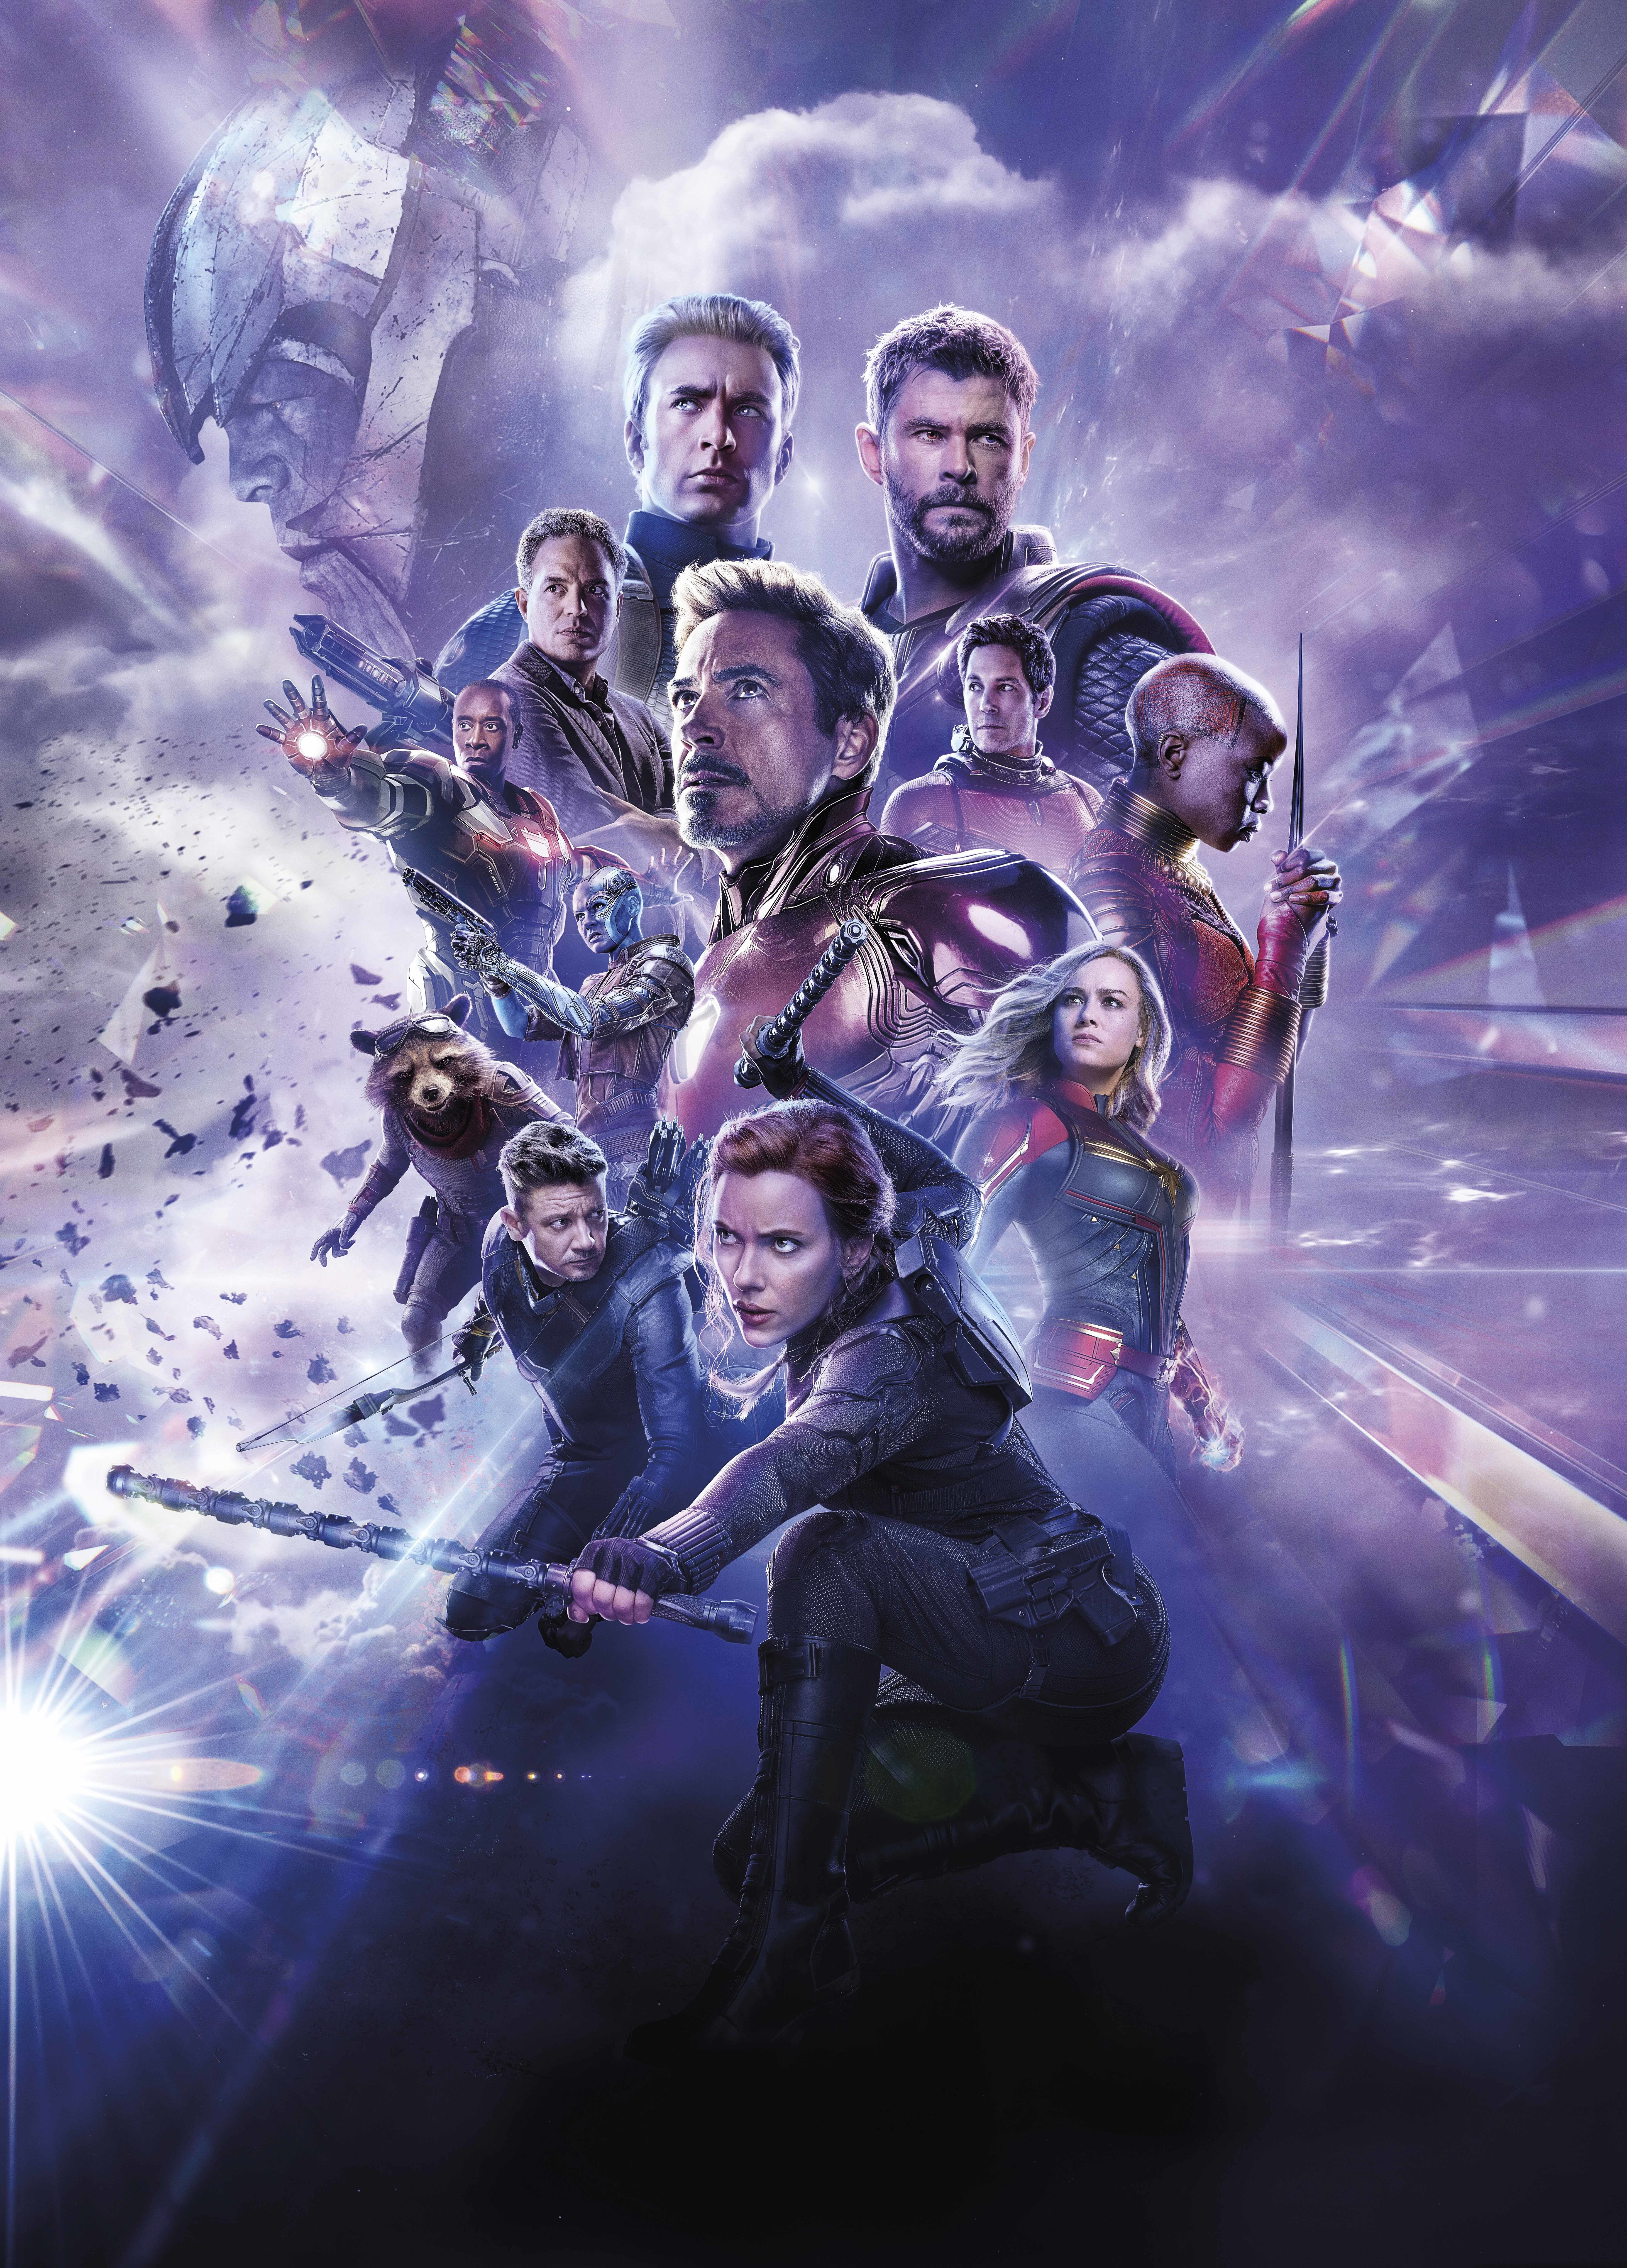 3840x Black Widow Avengers Endgame Official Poster 3840x Resolution Wallpaper Hd Movies 4k Wallpapers Images Photos And Background Wallpapers Den